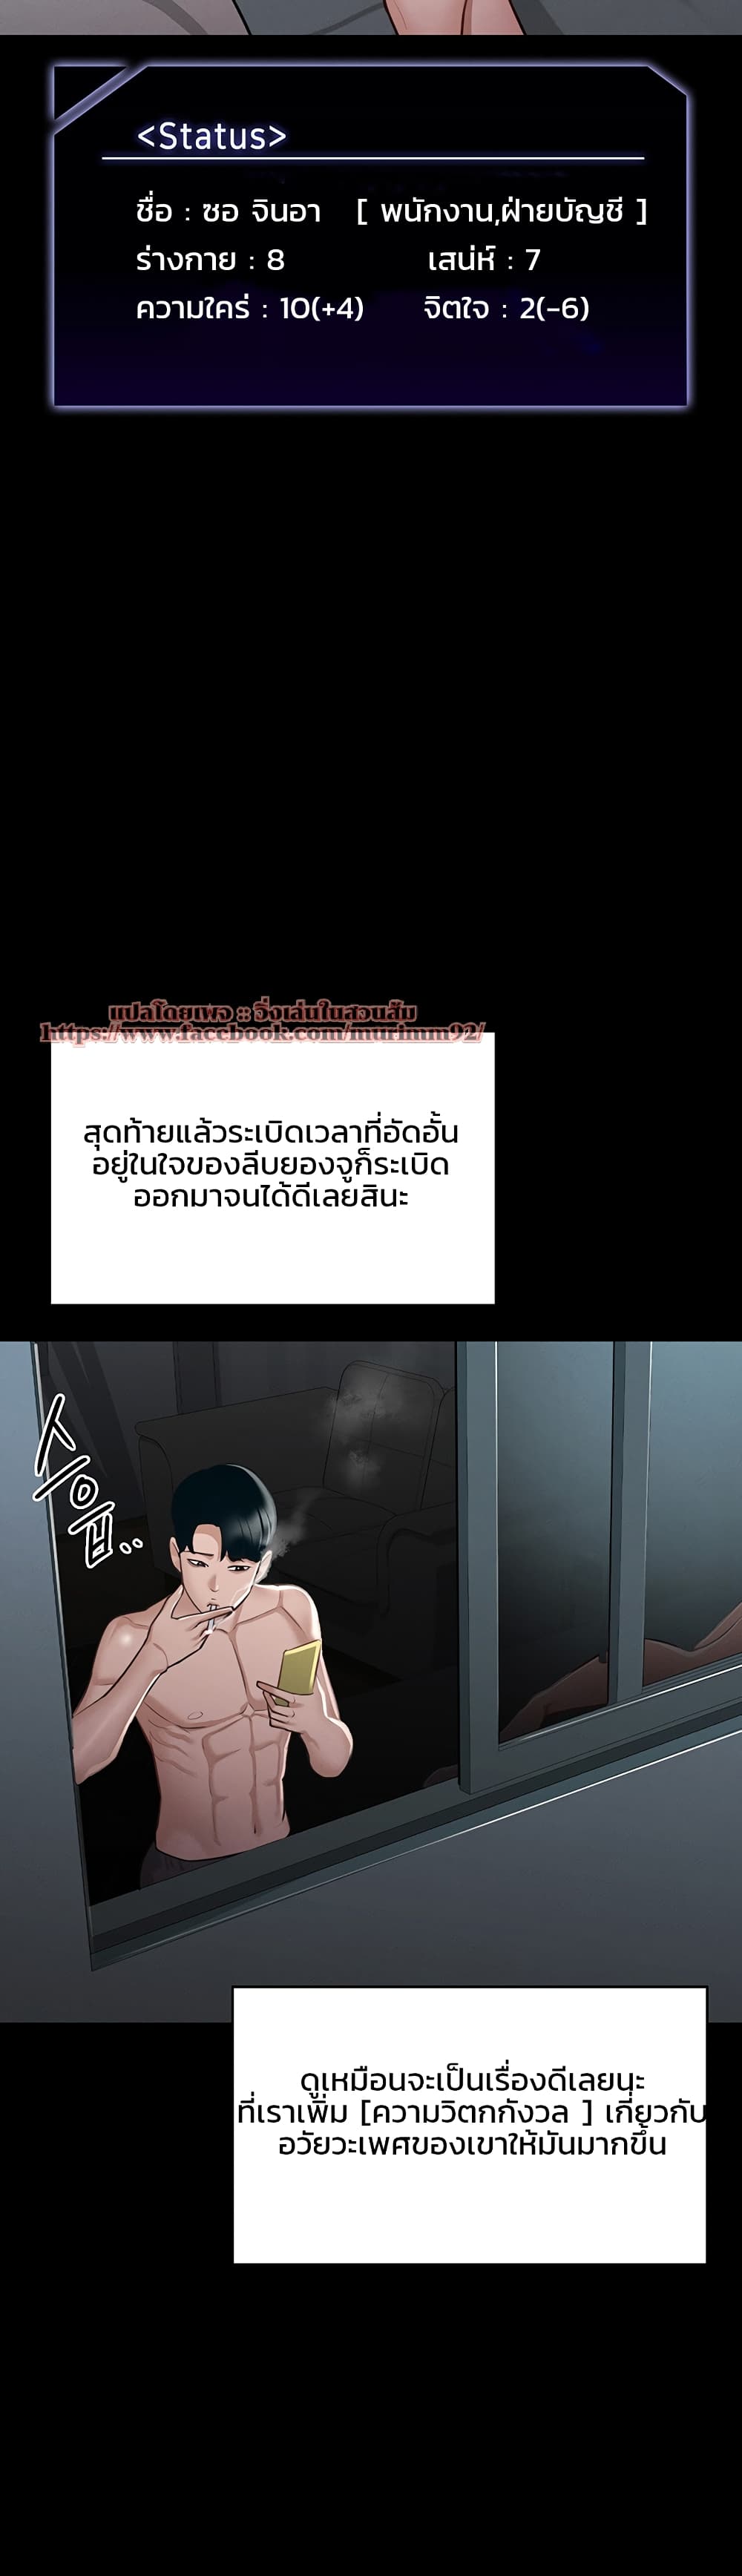 Workplace Manager Privileges ตอนที่ 9 ภาพ 49